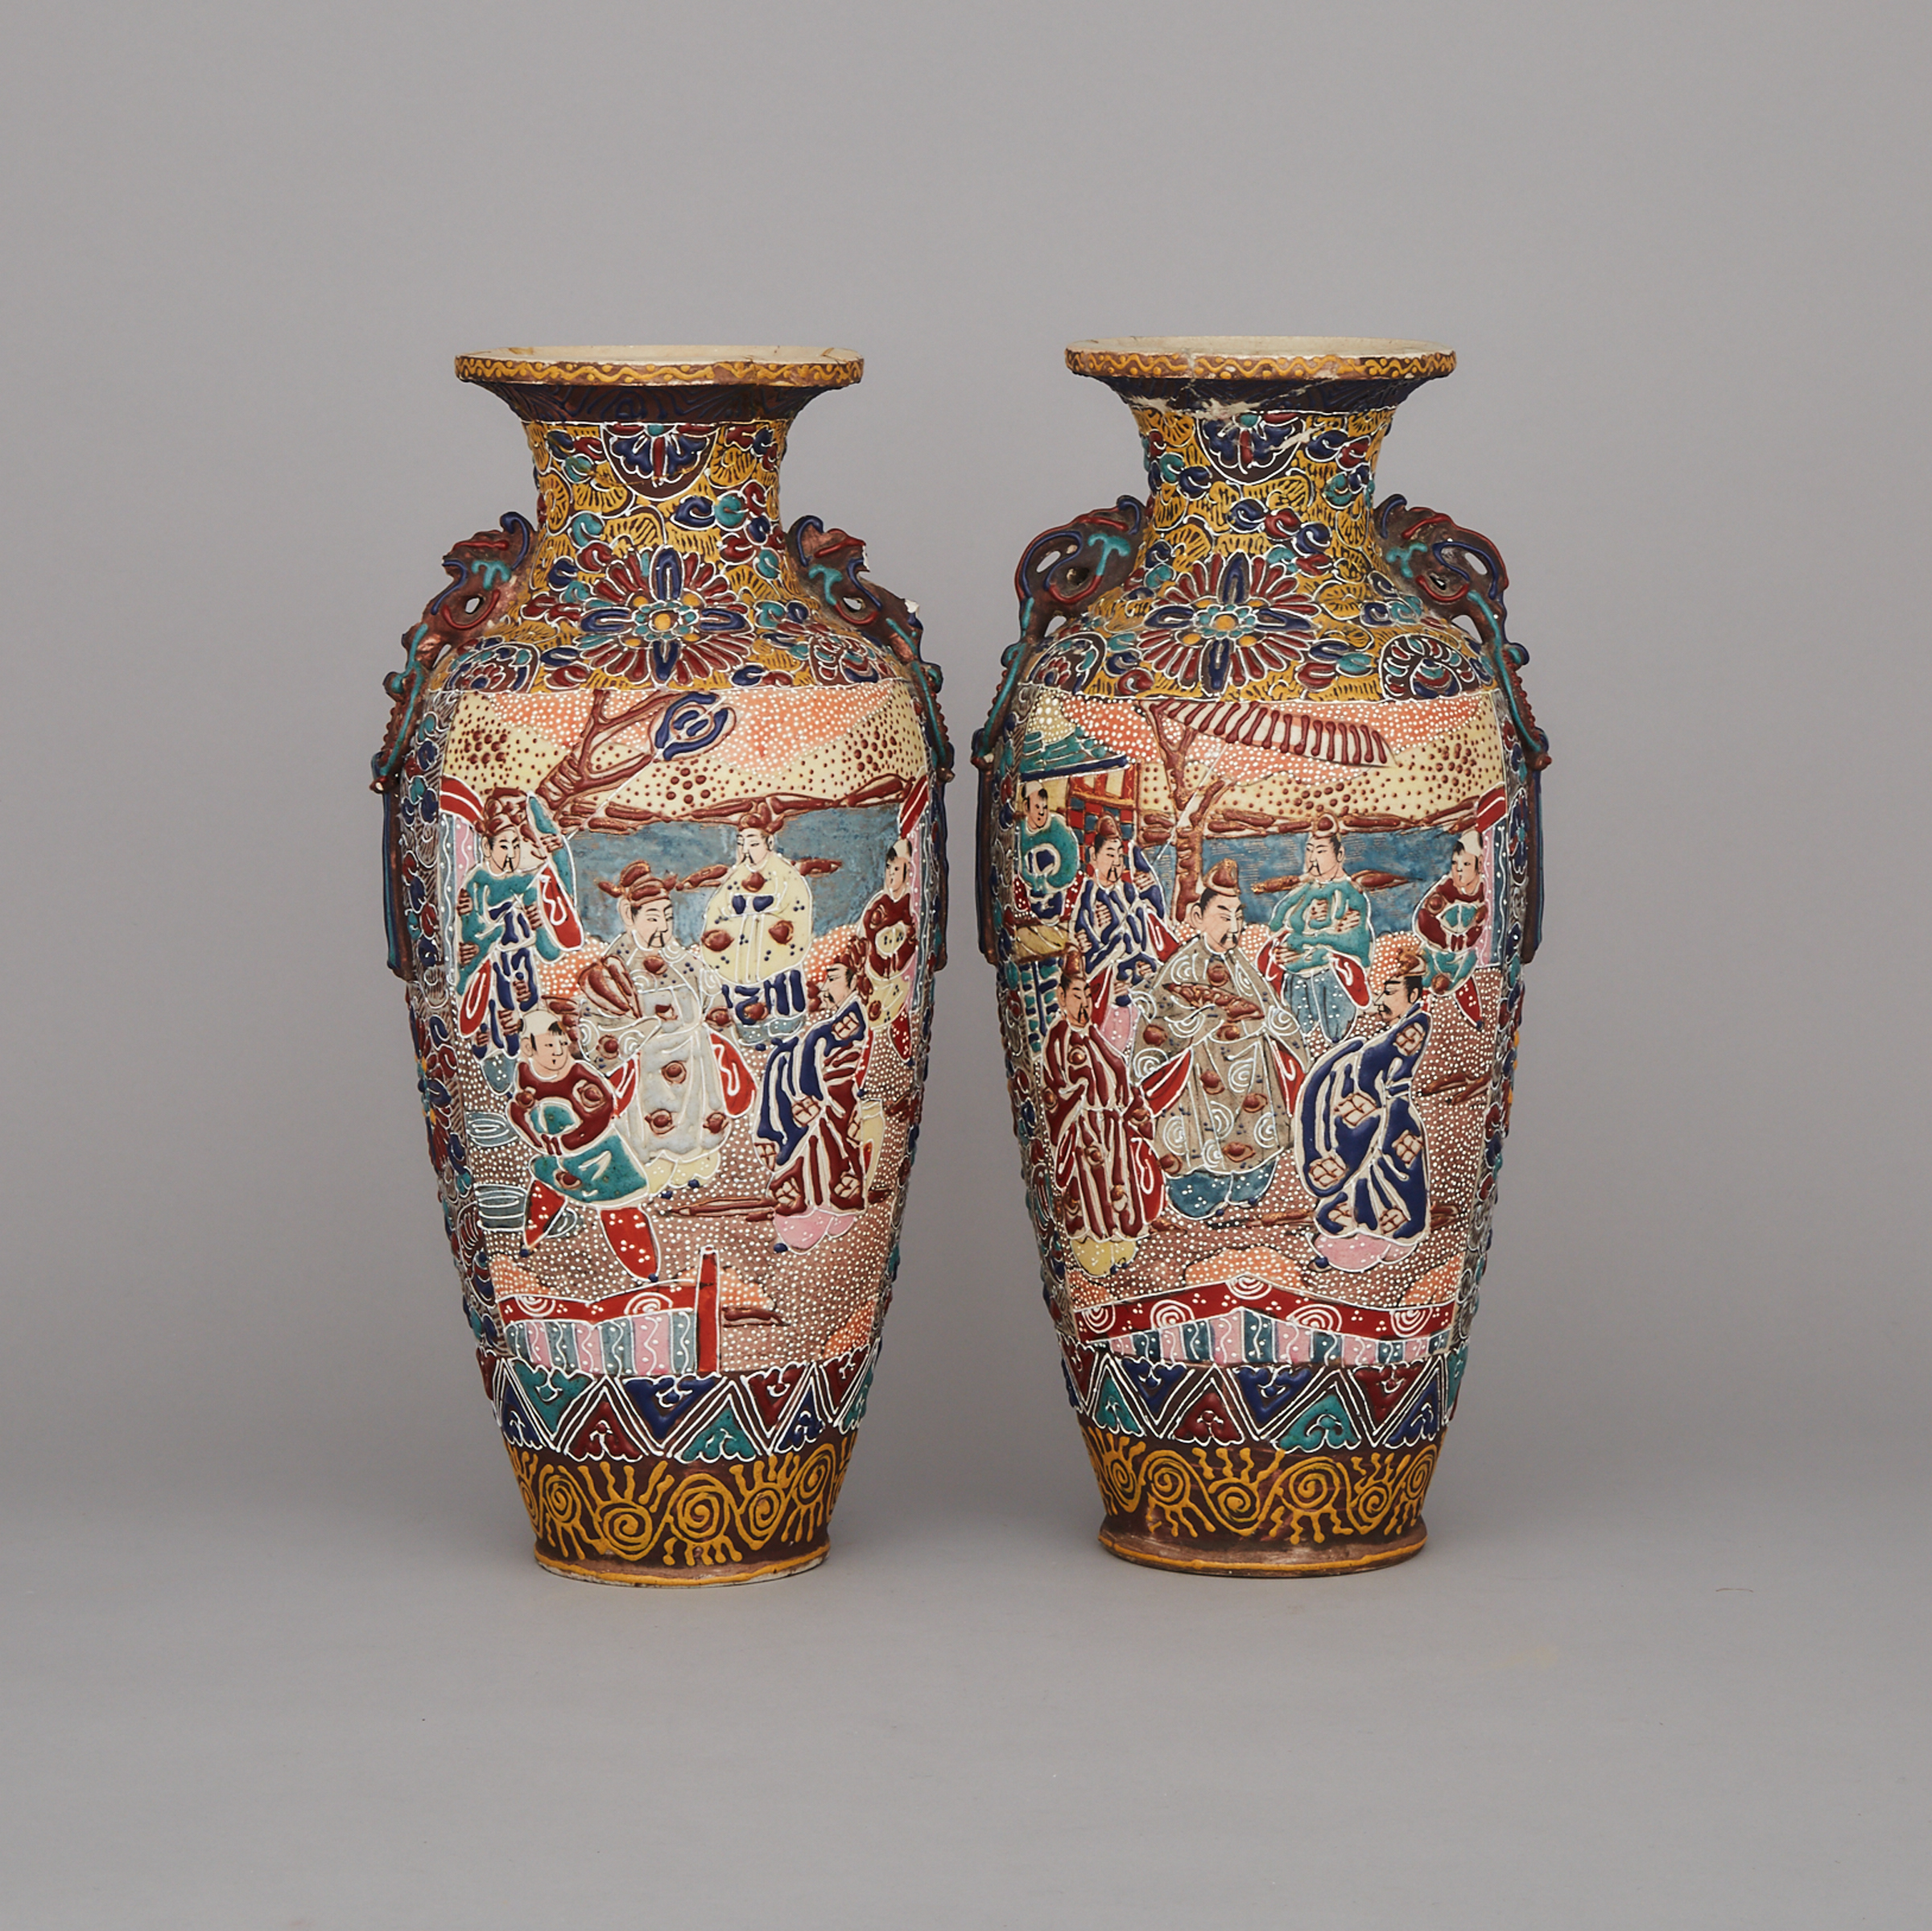 A Pair of Japanese Moriage Vases